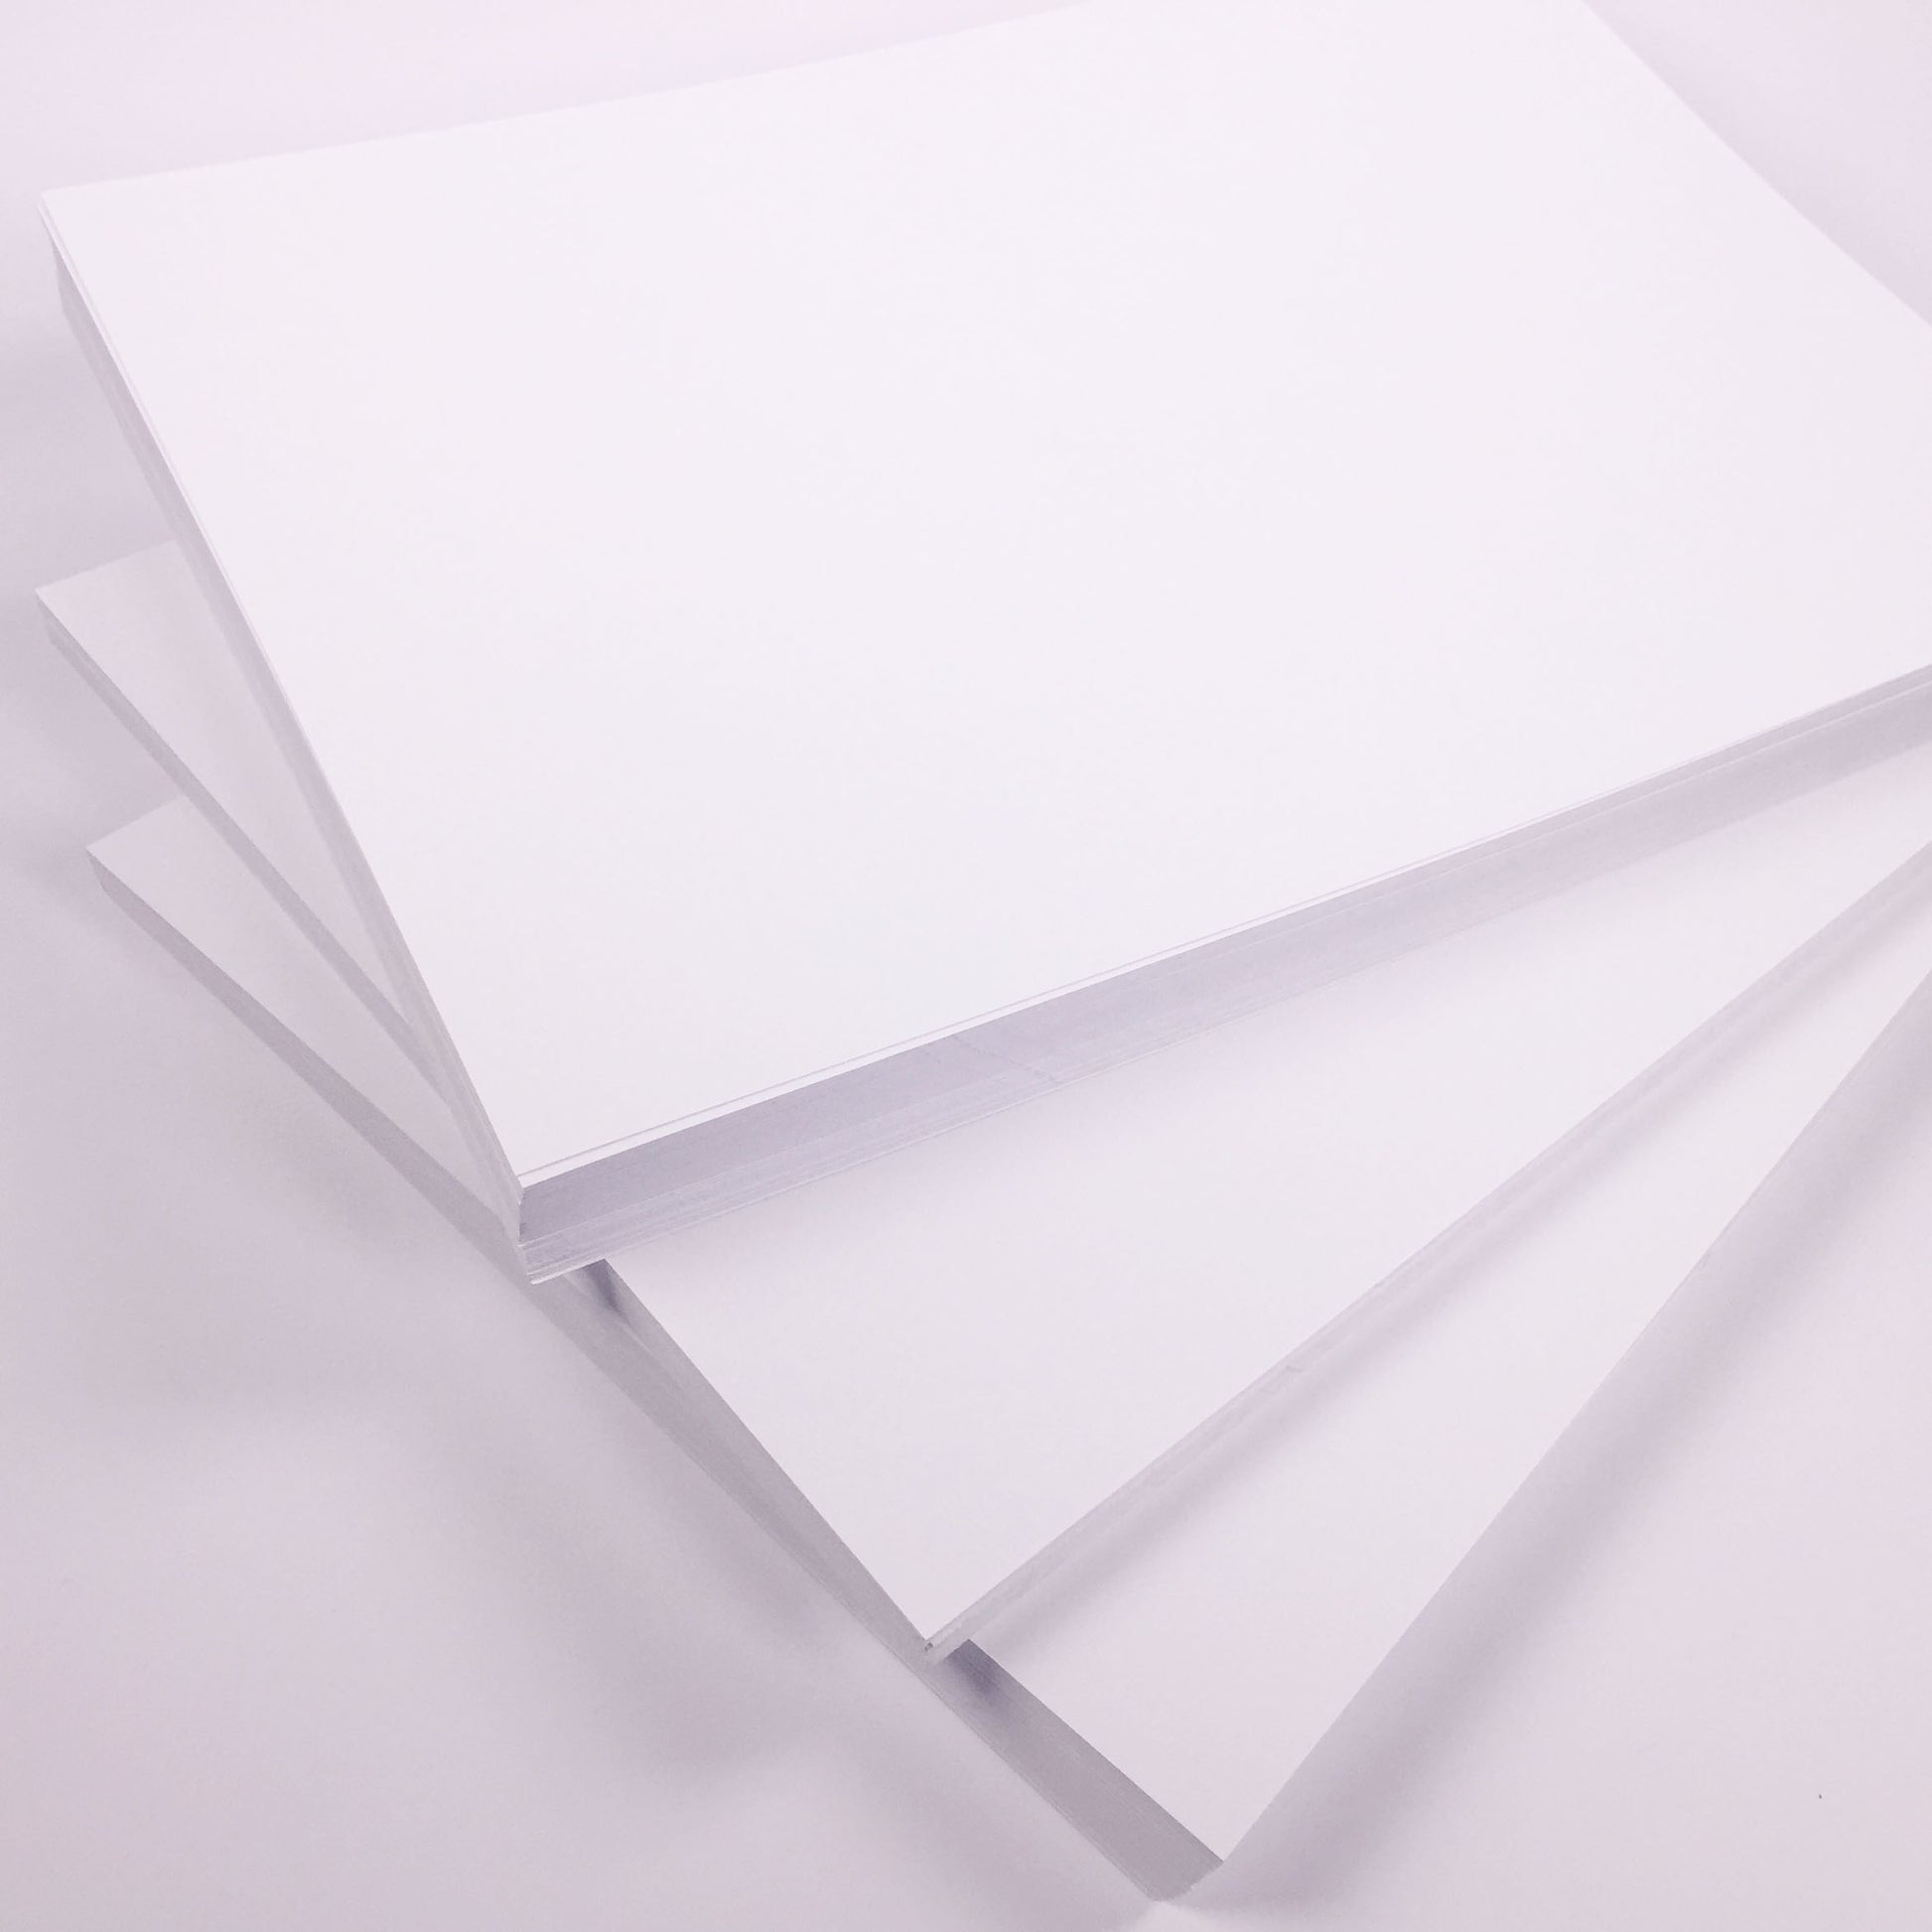 Large bright white card